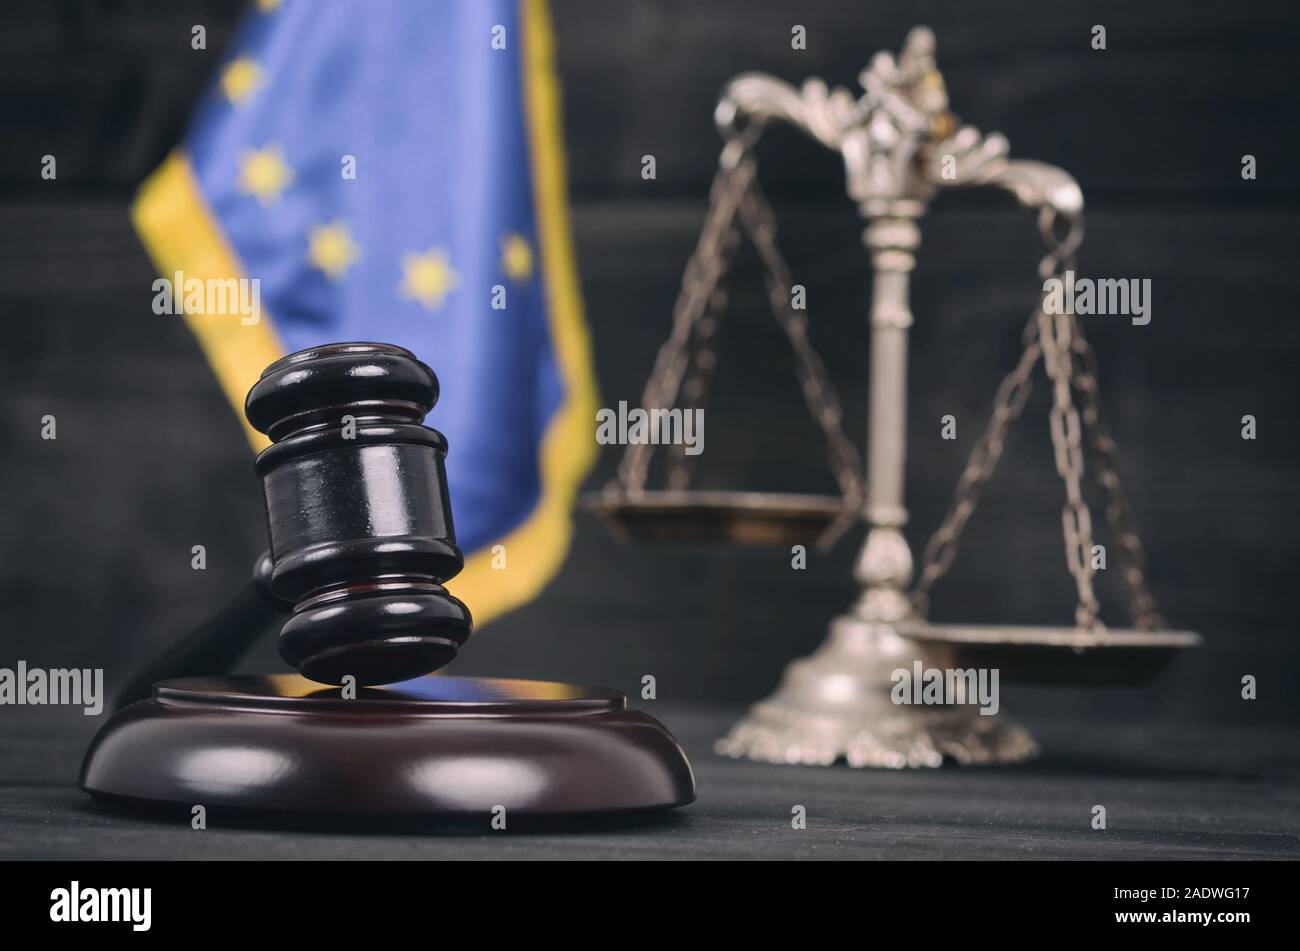 Law and Justice , Legality concept, Scales of Justice, Judge Gavel and Flag of the European Union on a black wooden background. Stock Photo